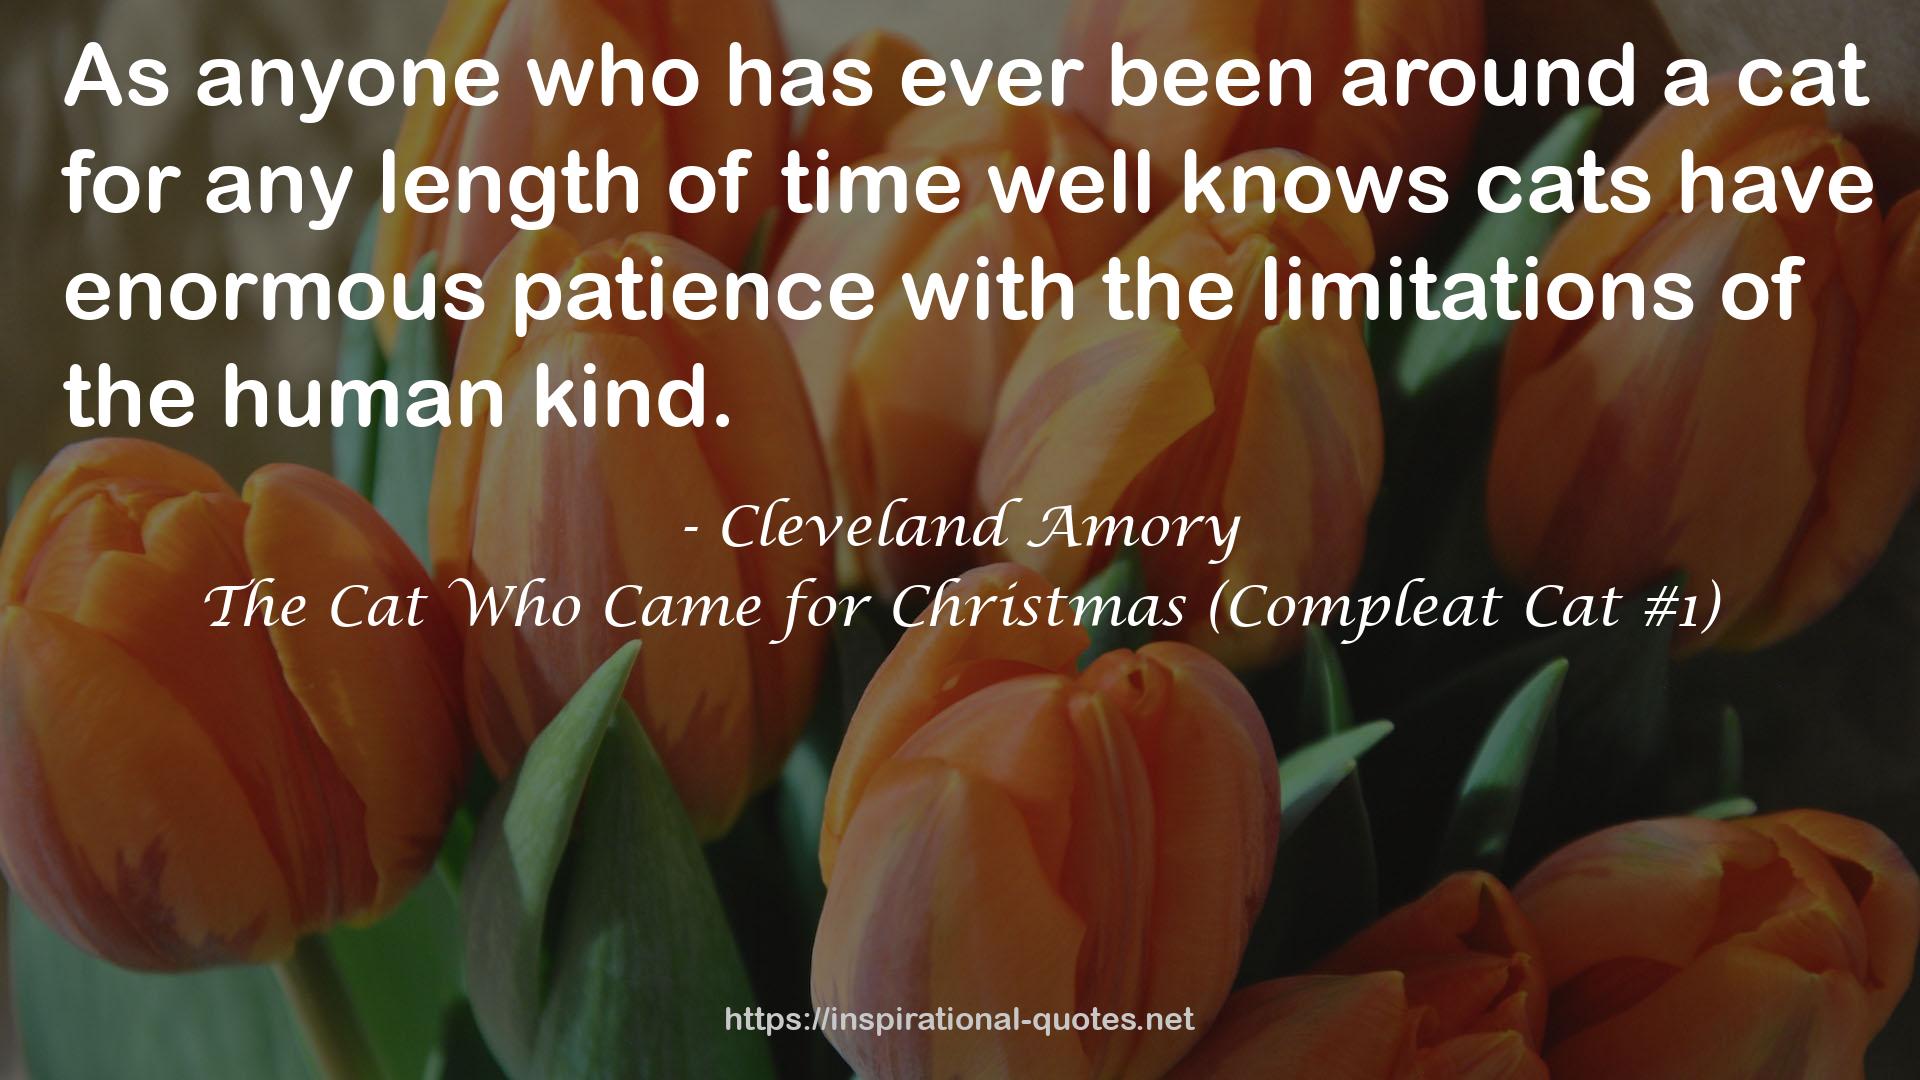 Cleveland Amory QUOTES